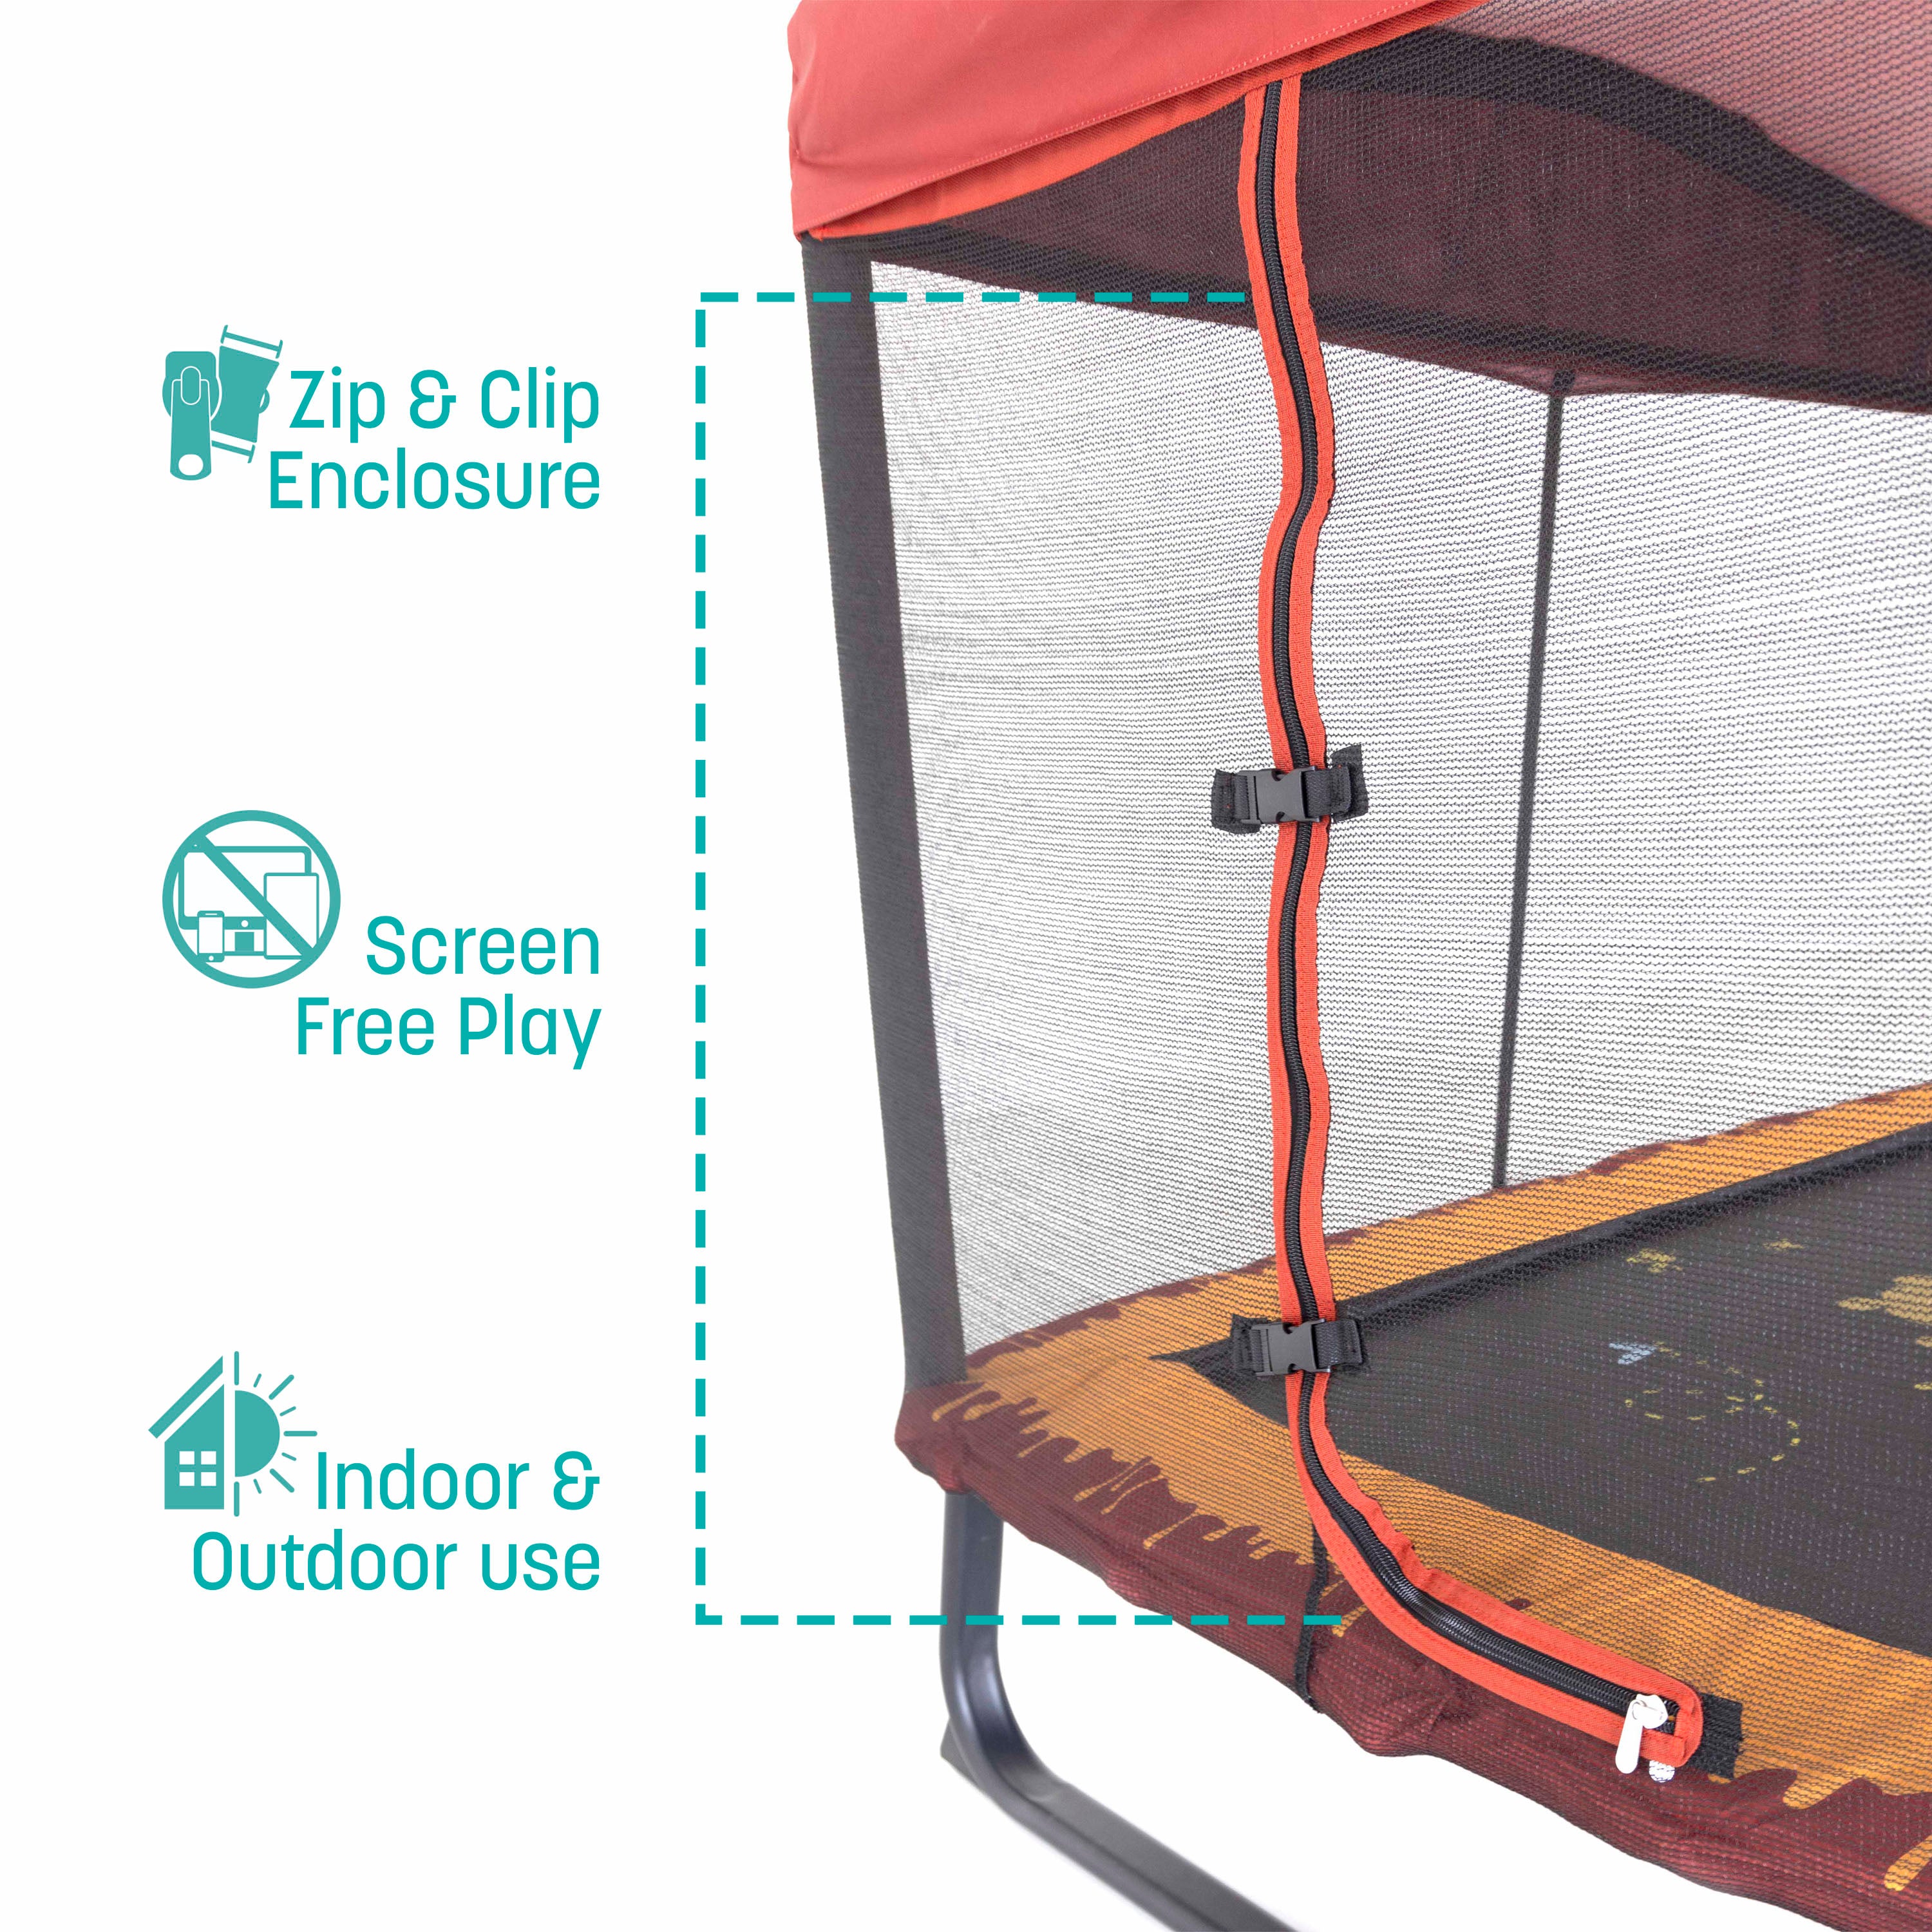 The trampoline has a red and black zipper. Three teal callout features state, “Zip & Clip Enclosure, Screen Free Play, Indoor & Outdoor use”. 